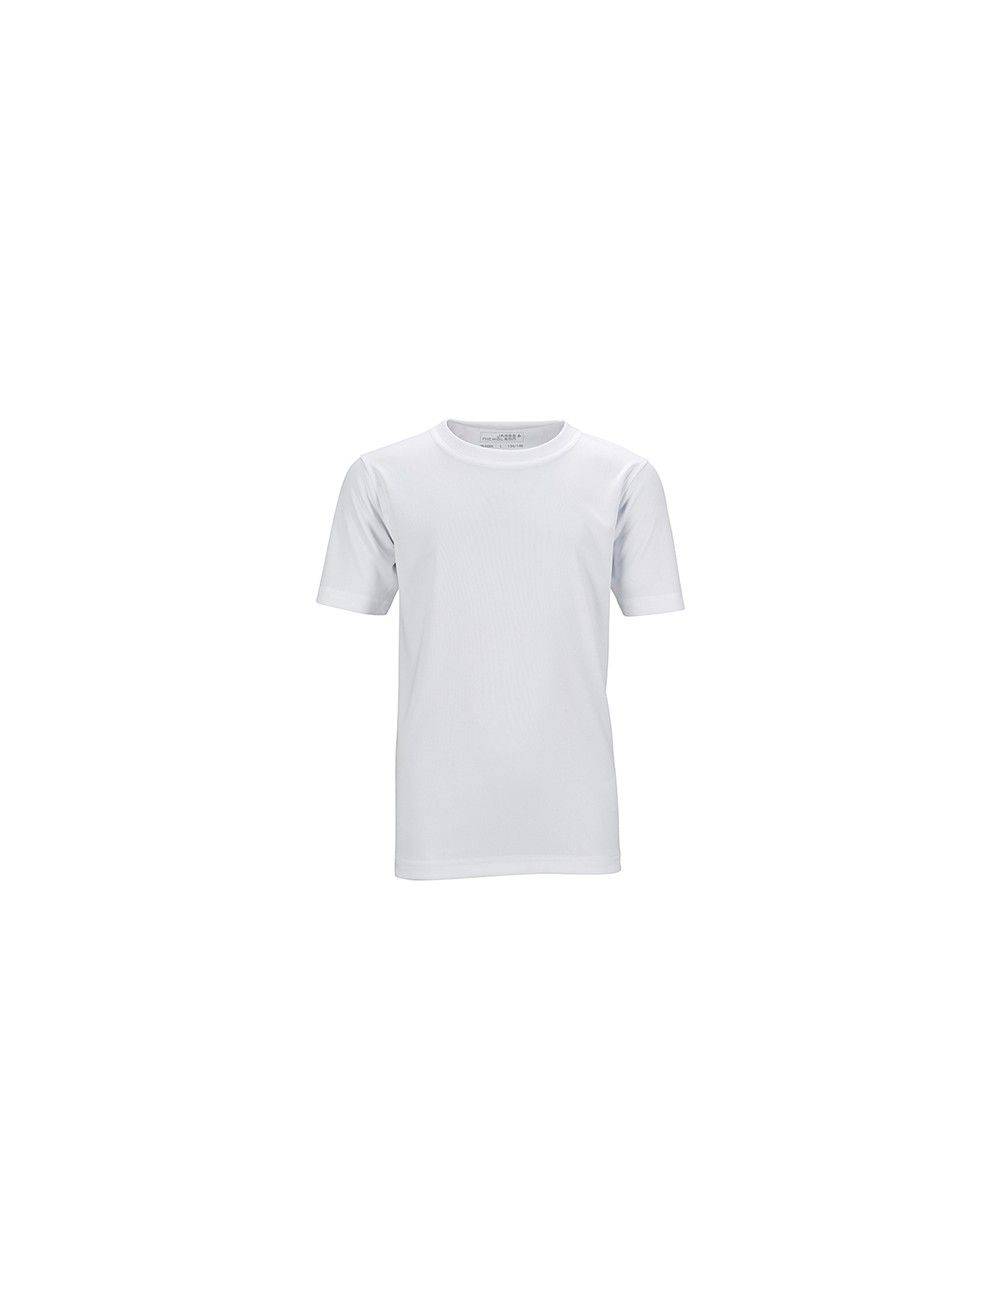 copy of Ladies Active T-Shirt, Round Neck, Farbe White - 1